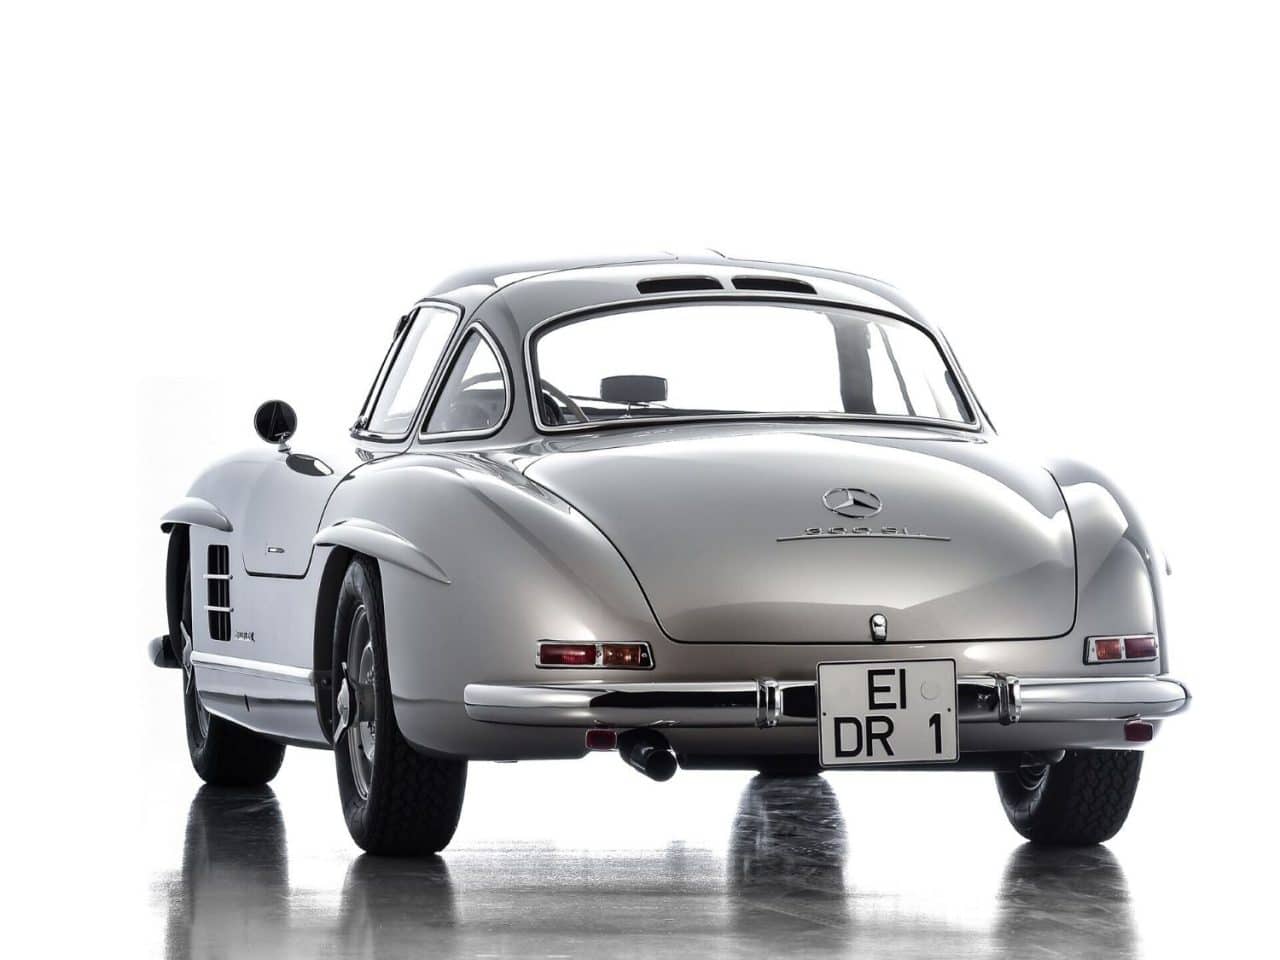 Warhol, The “Warhol Gullwing” To Be Auctioned, ClassicCars.com Journal